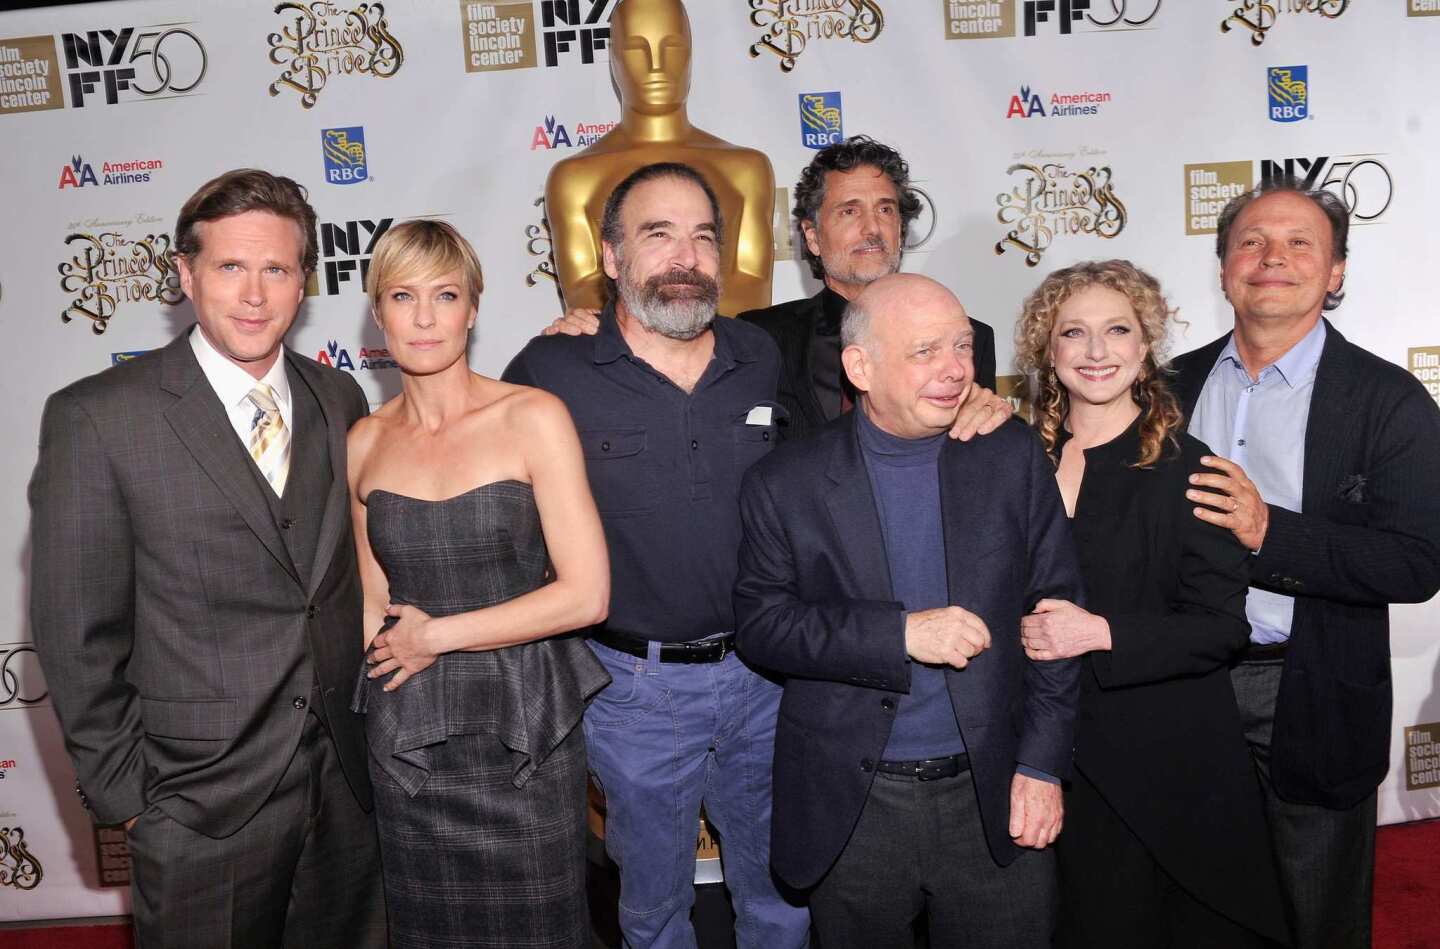 "The Princess Bride" cast members Cary Elwes, left, Robin Wright, Mandy Patinkin, Chris Sarandon, Wallace Shawn, Carol Kane and Billy Crystal were joined by director Rob Reiner and writer William Goldman for the 25th anniversary and Blu-Ray release of the 1987 adventure comedy.